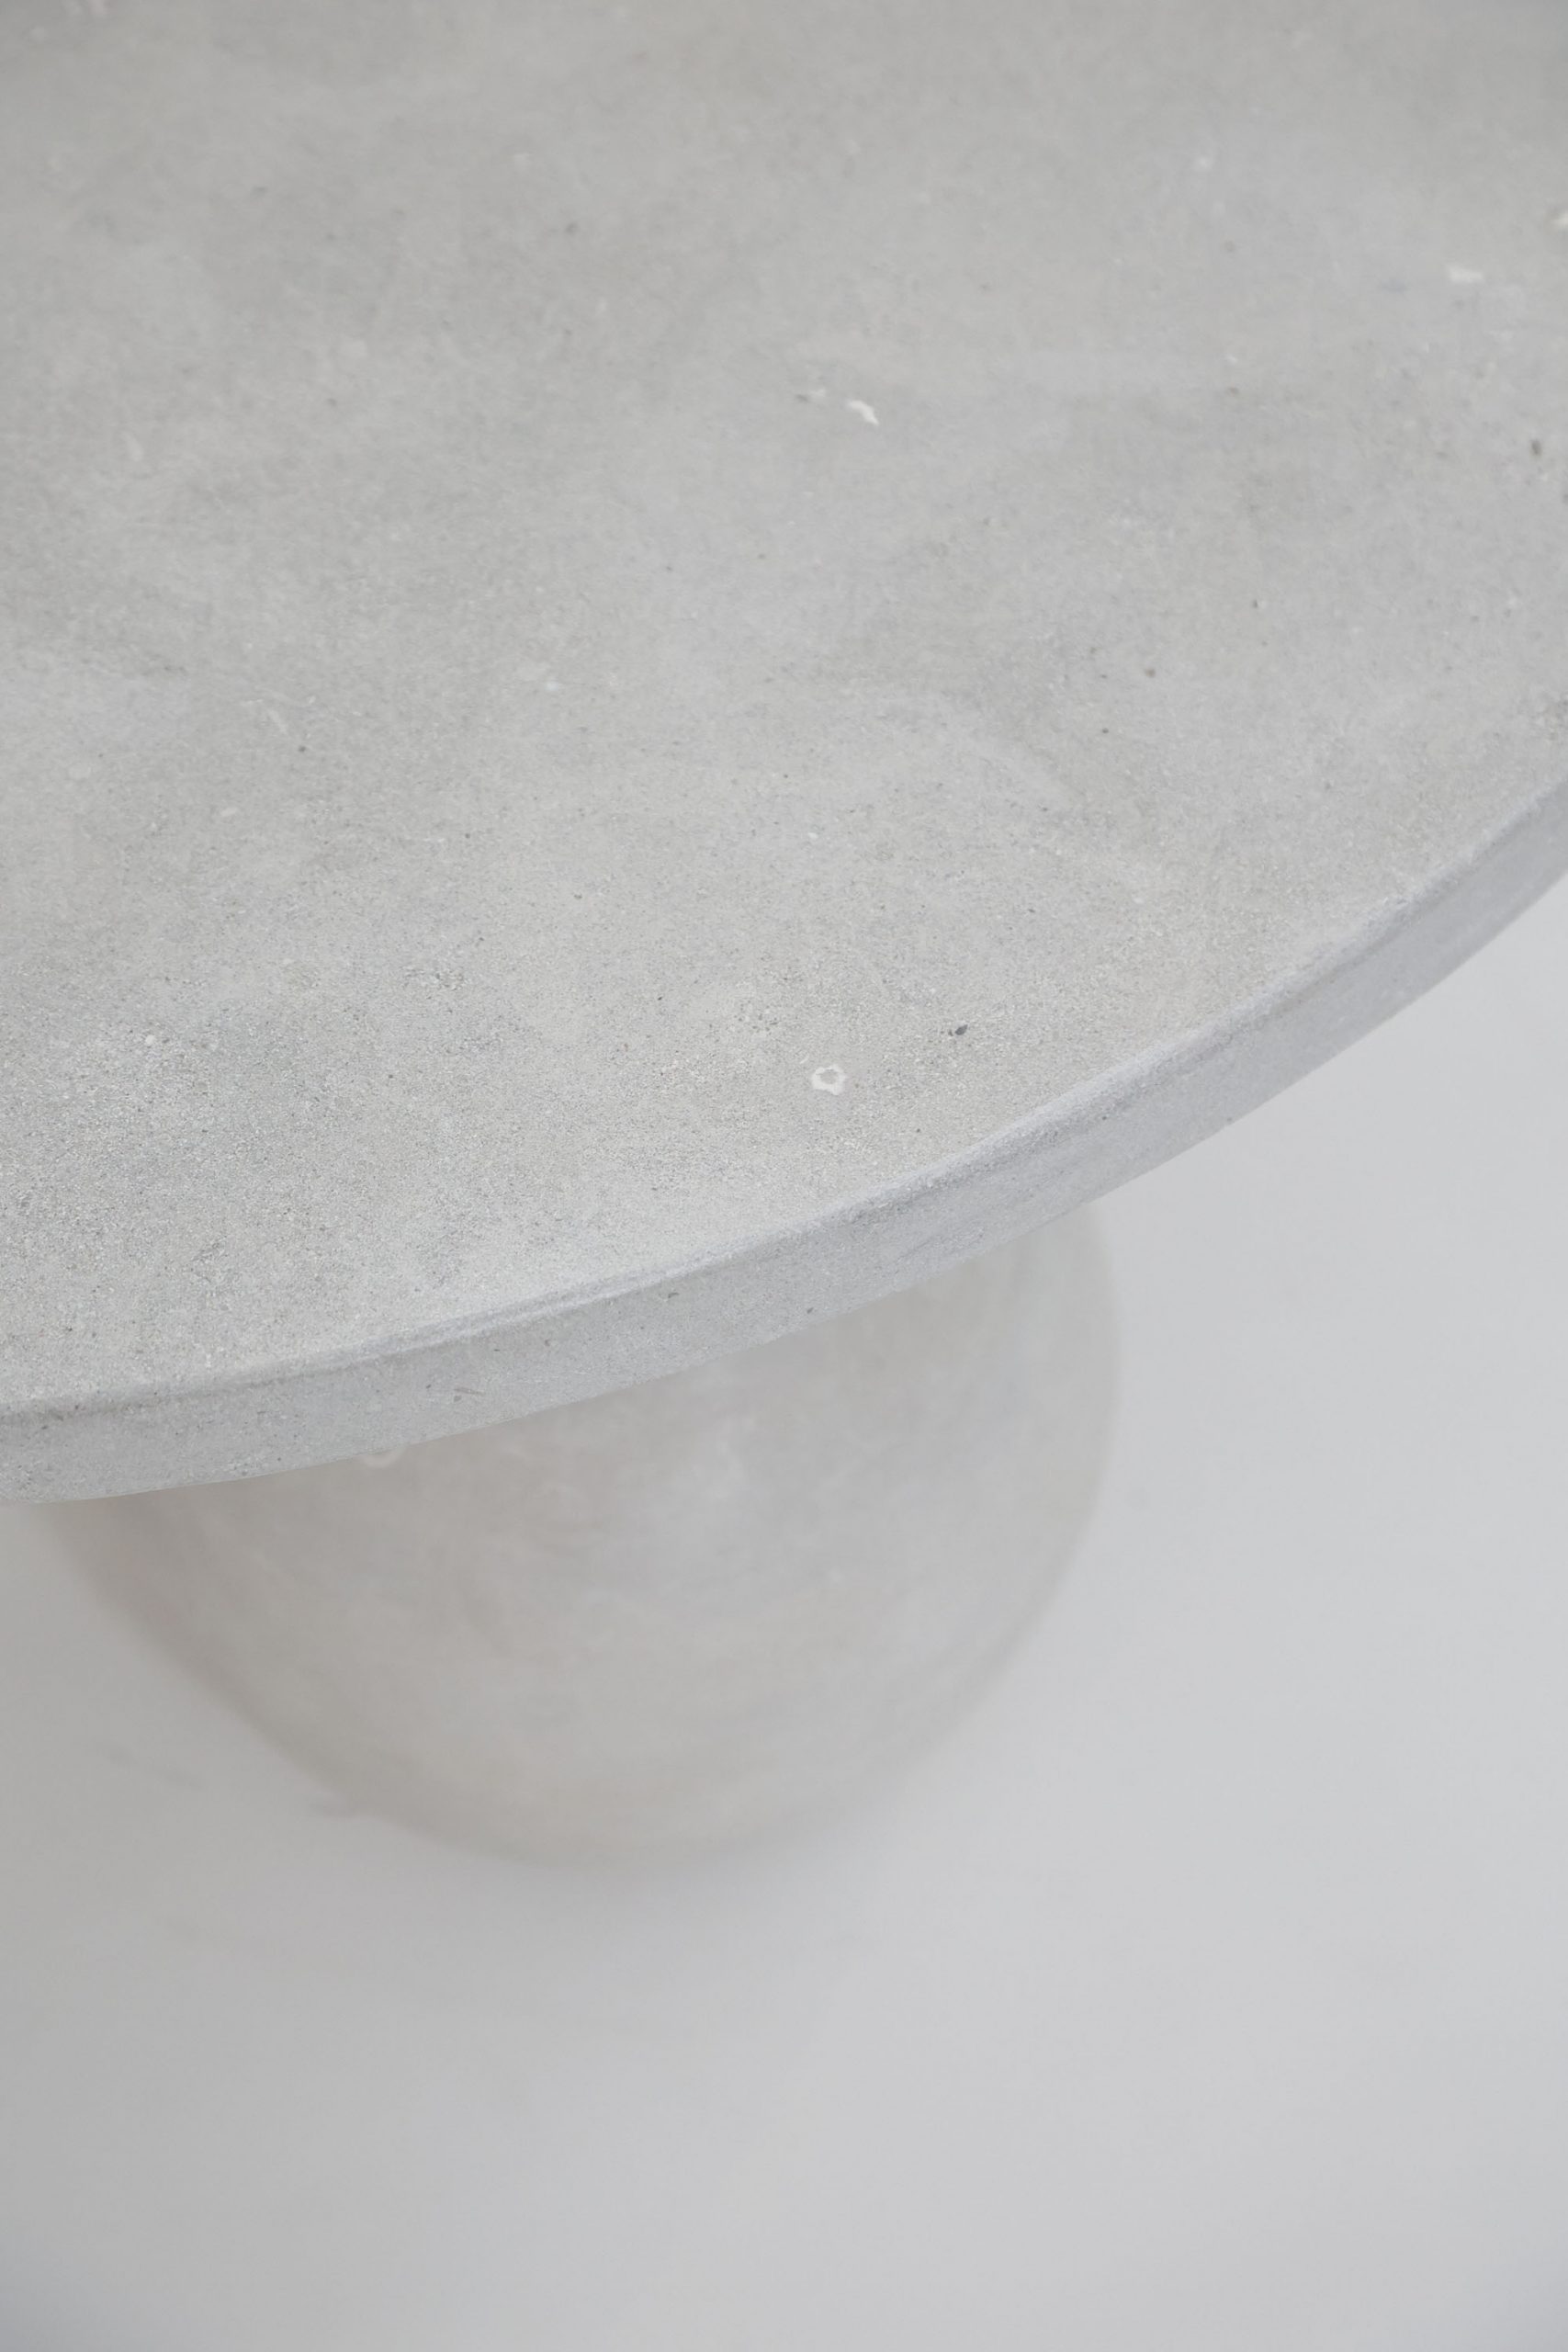 GREY MARBLE TABLE WITH SPHERICAL BASE-image